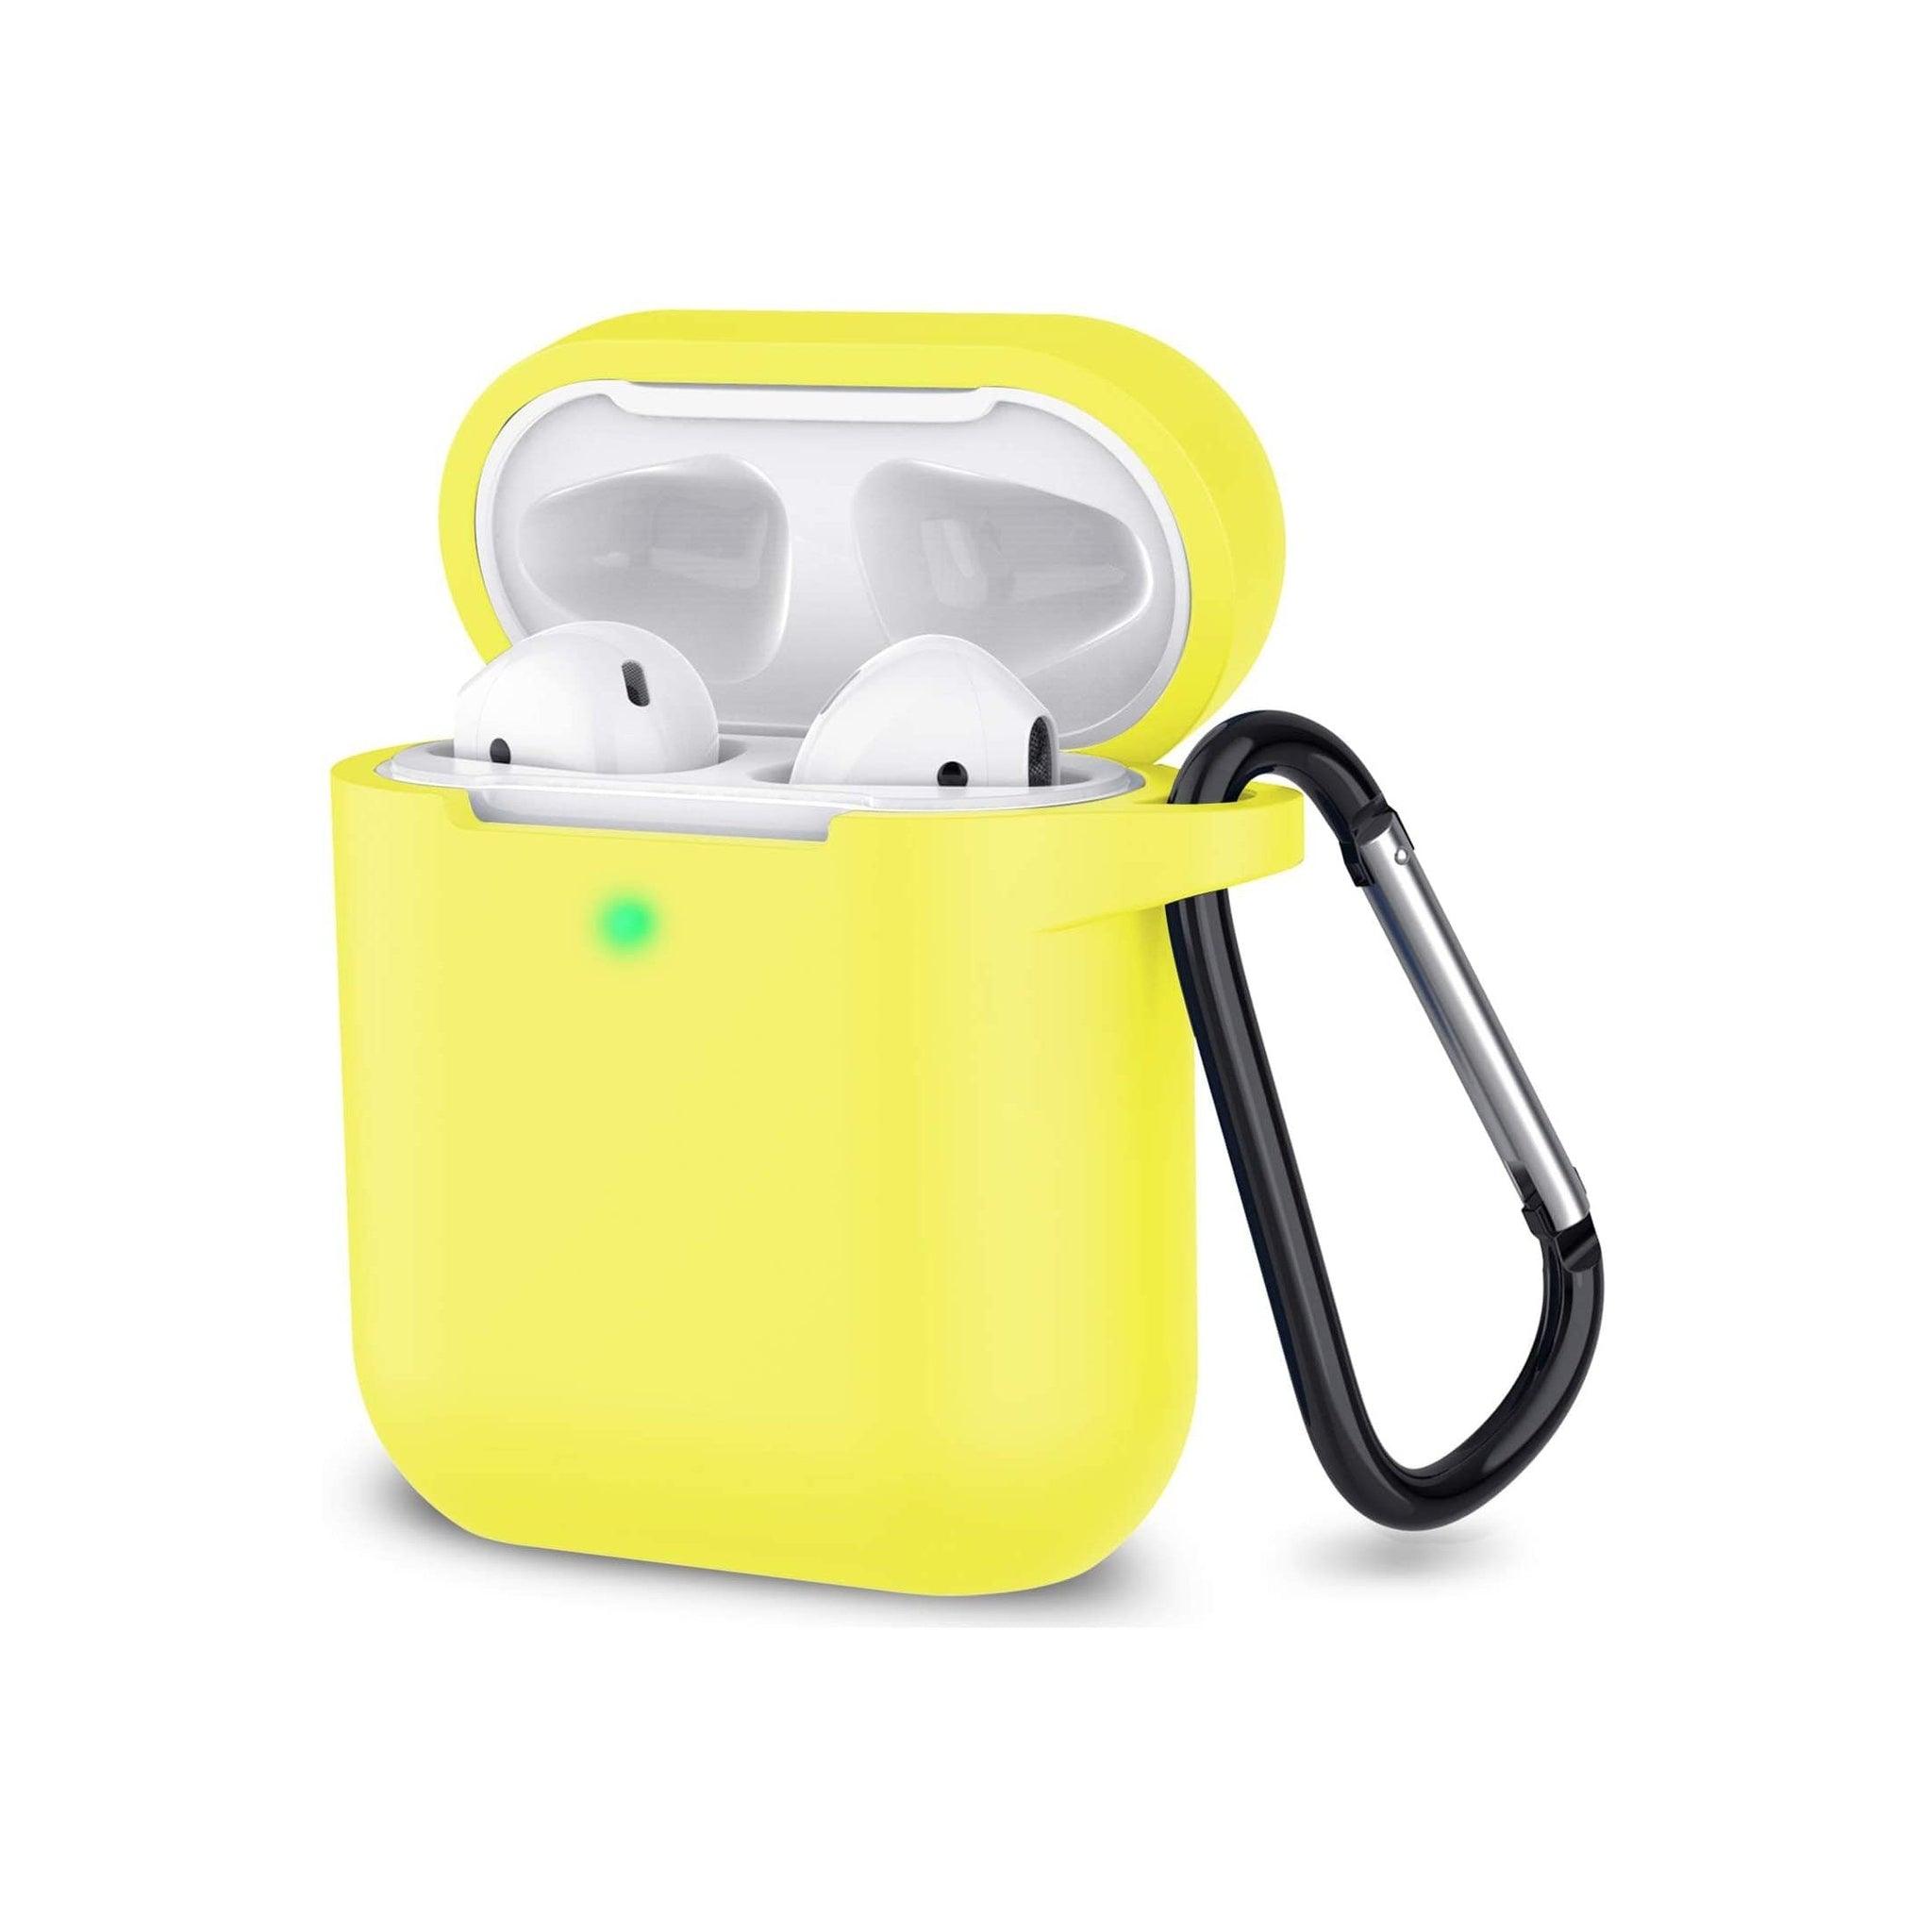 FR Fashion Co. Silicone AirPods Case Cover with Keychain - FR Fashion Co. 